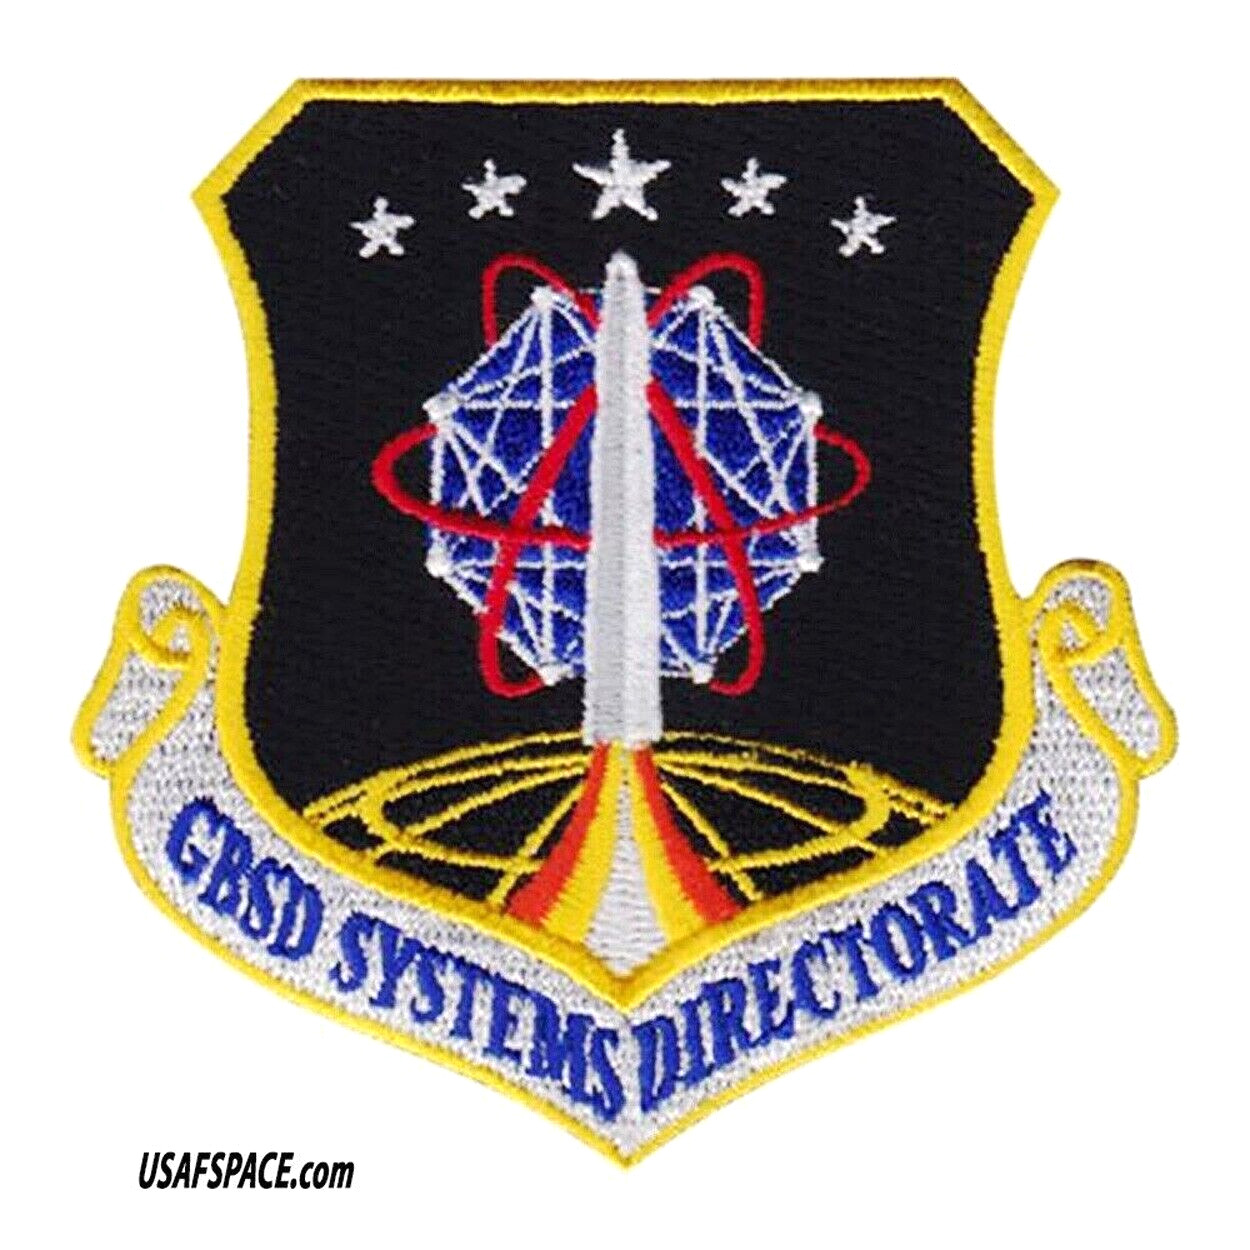 AFNWC GBSD SYSTEMS DIRECTORATE-LGM-30G Minuteman III-KIRTLAND AFB-USAF-VEL PATCH